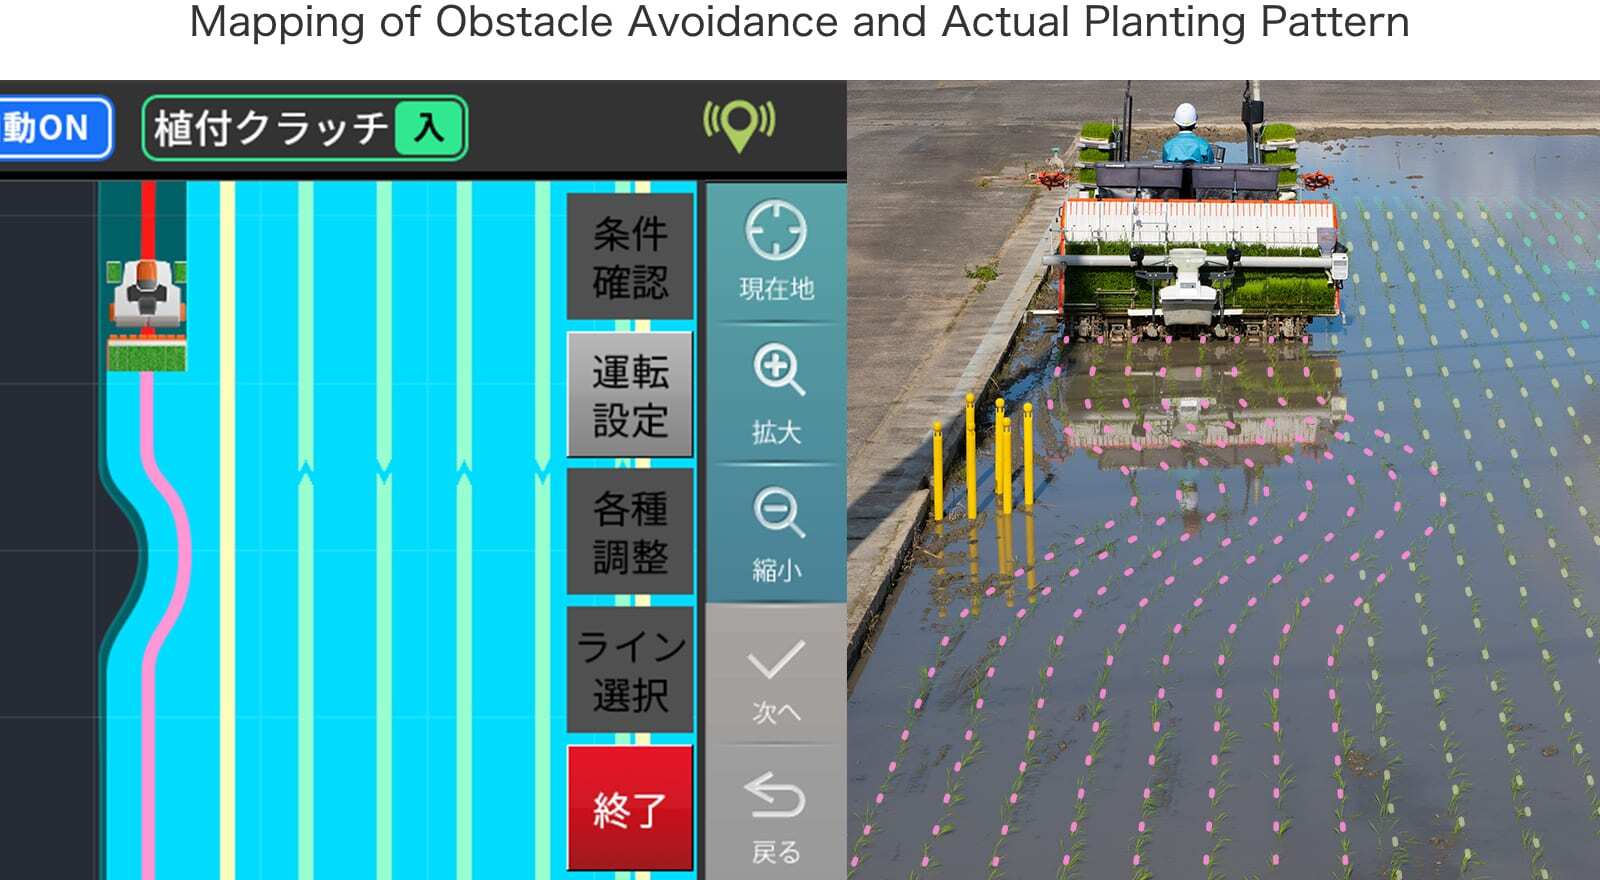 Mapping of Obstacle Avoidance and Actual Planting Pattern